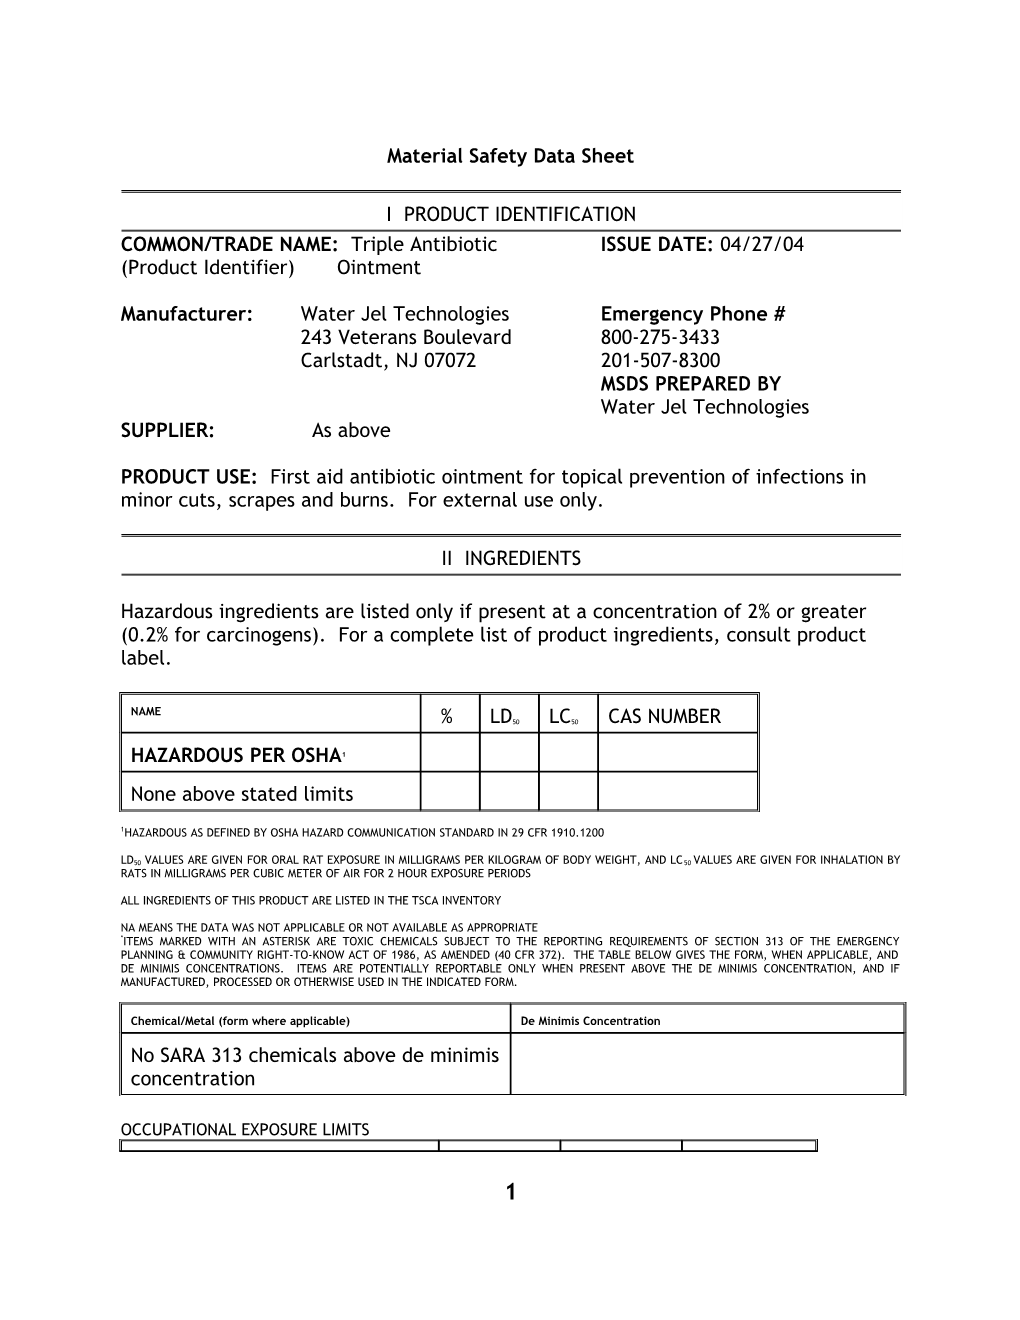 Material Safety Data Sheet s9